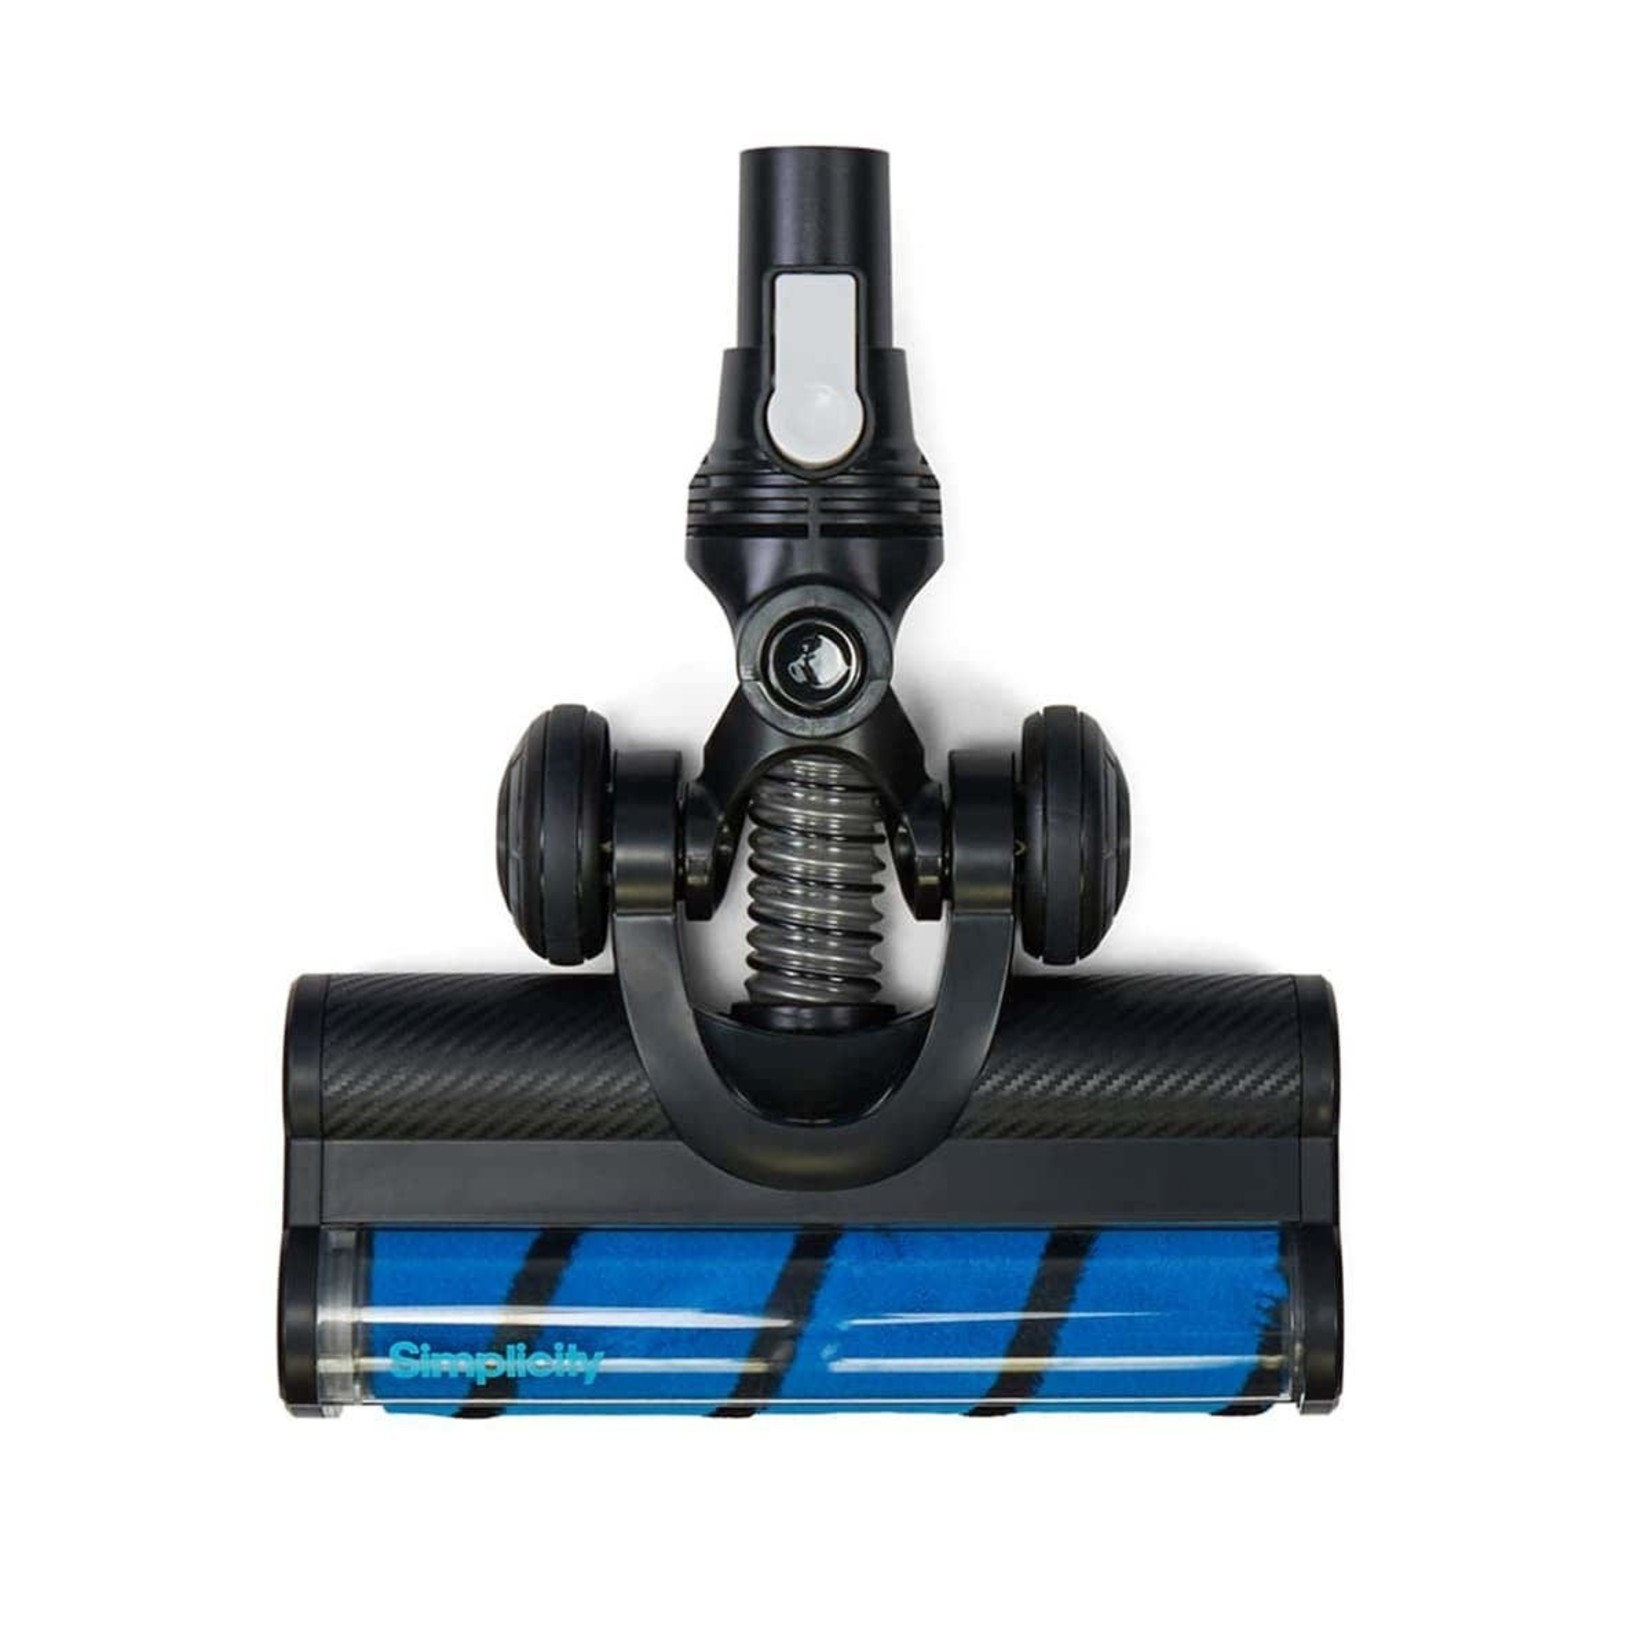 Simplicity Simplicity Soft Bare Floor Nozzle for S65 Series